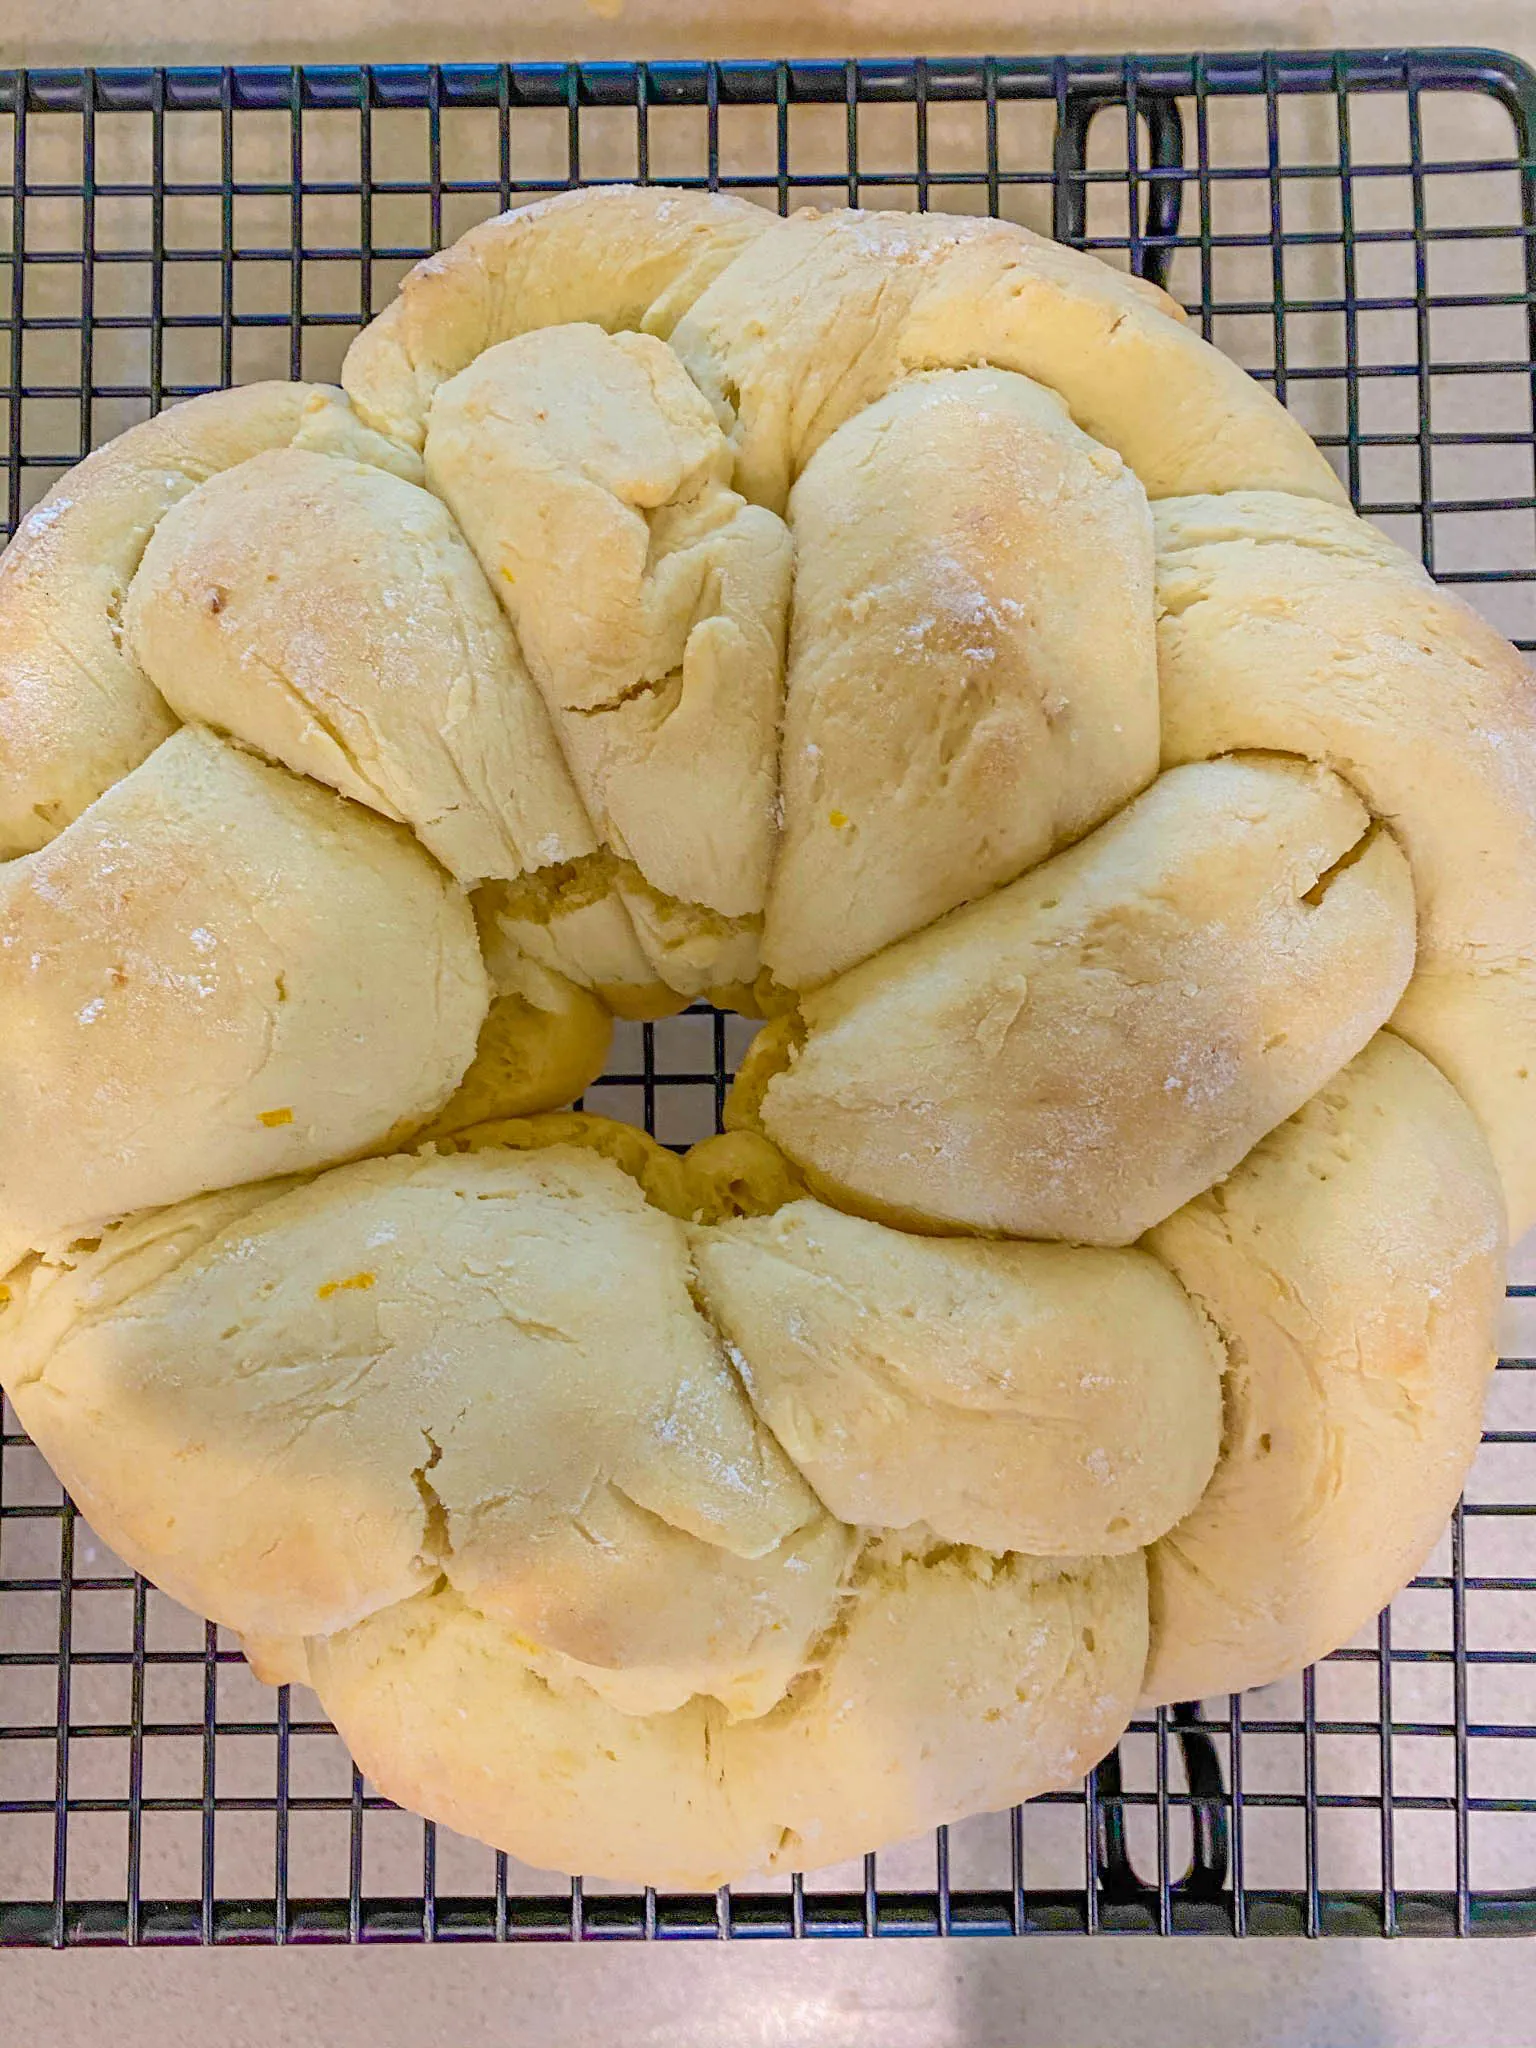 No-Rise Italian Easter Bread is a sweet bread you'll love.